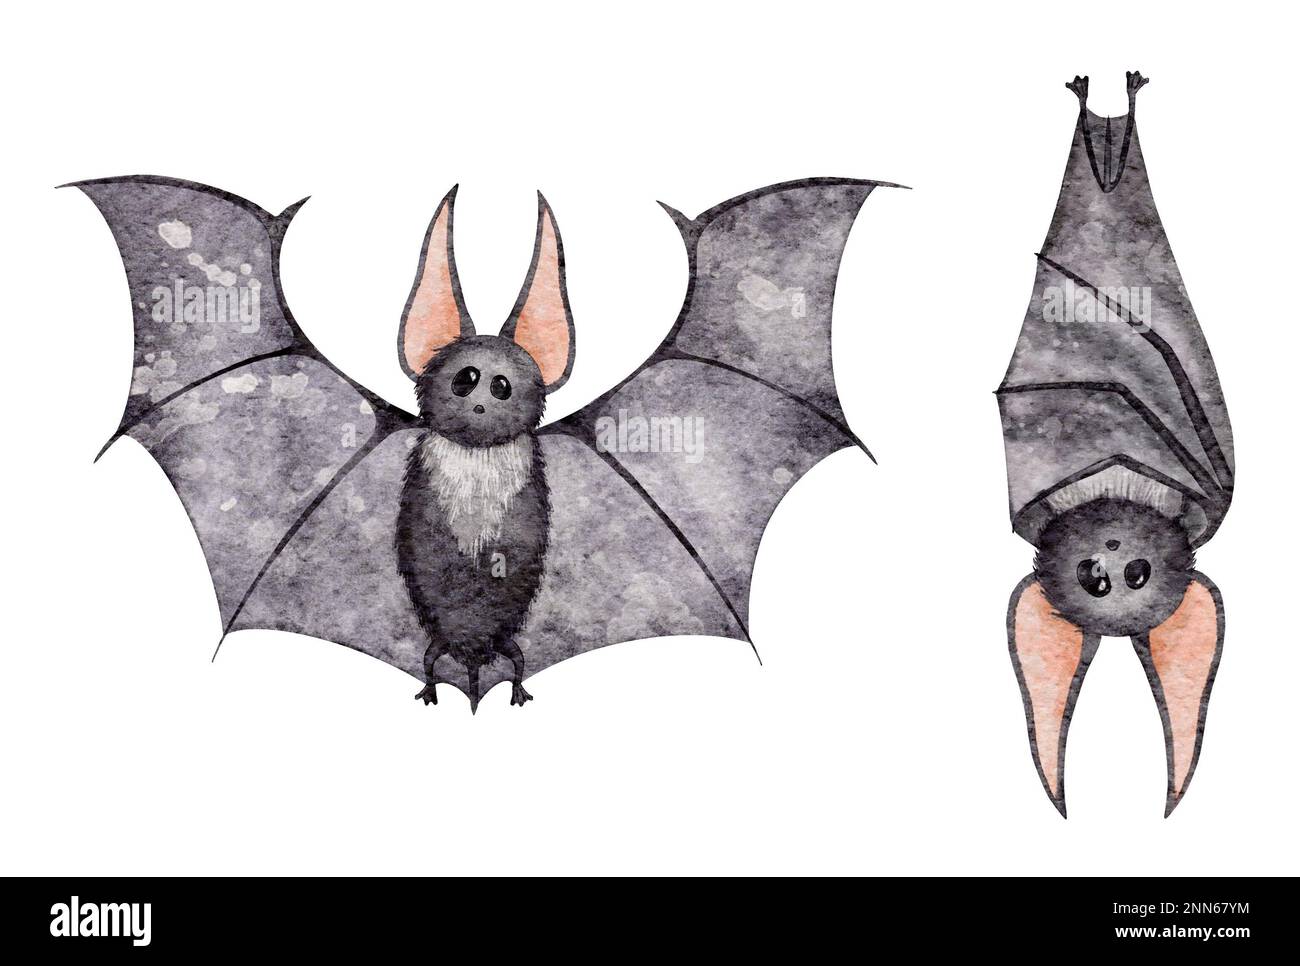 How to Draw a Bat - Step by Step Bat Drawing Tutorial | Draw a bat, Drawing  tutorial, Drawing tutorials for kids